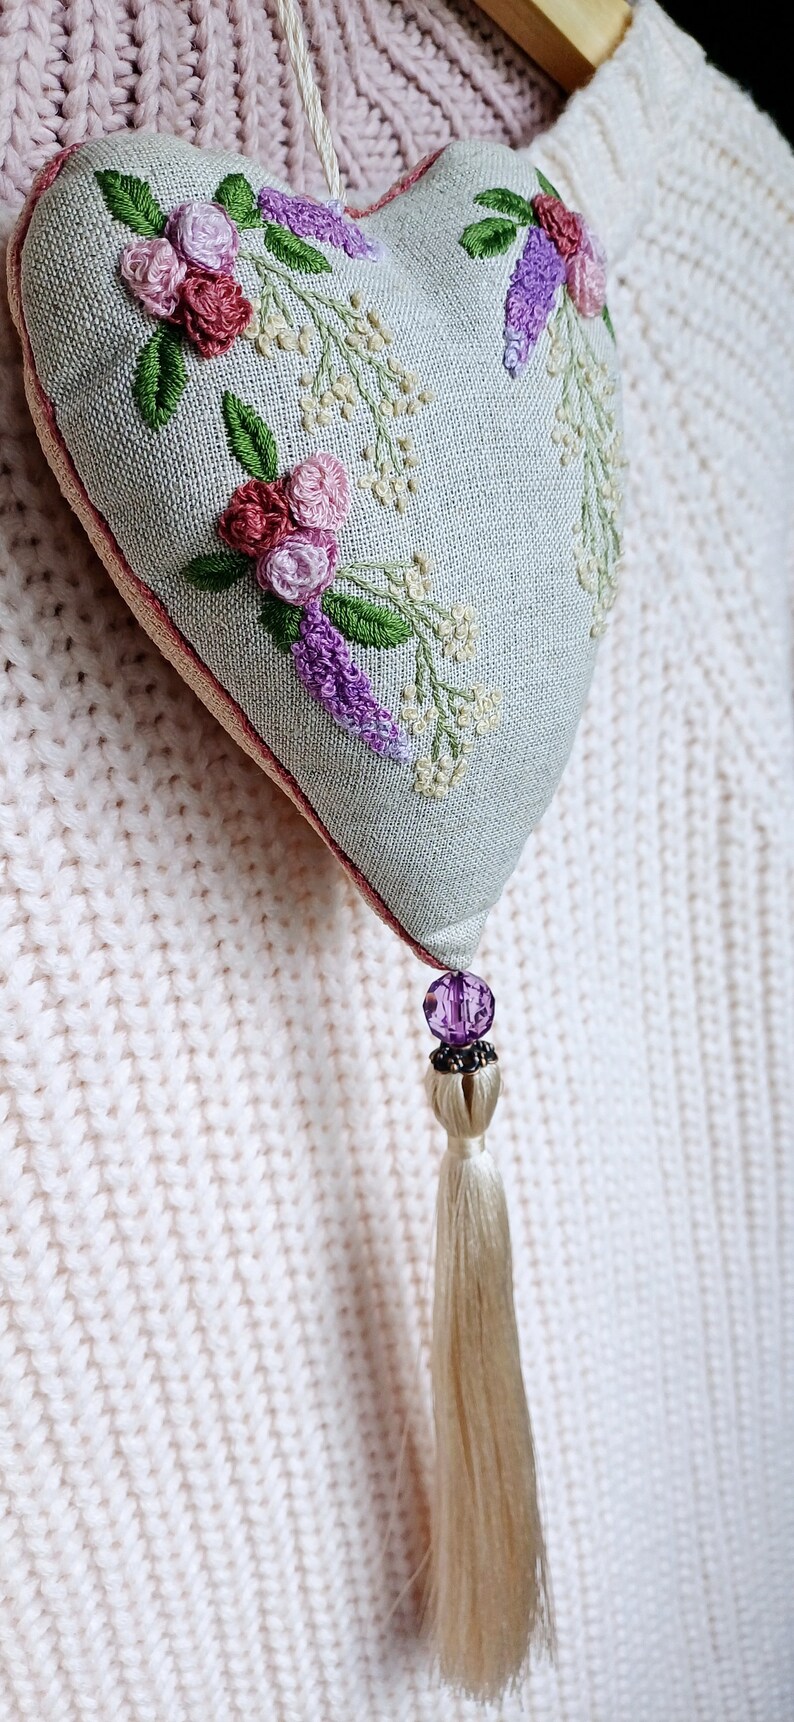 Handmade embroidered linen heart shaped home decor sachet, with hanging loop and tassel. Hung on a clothes hanger.